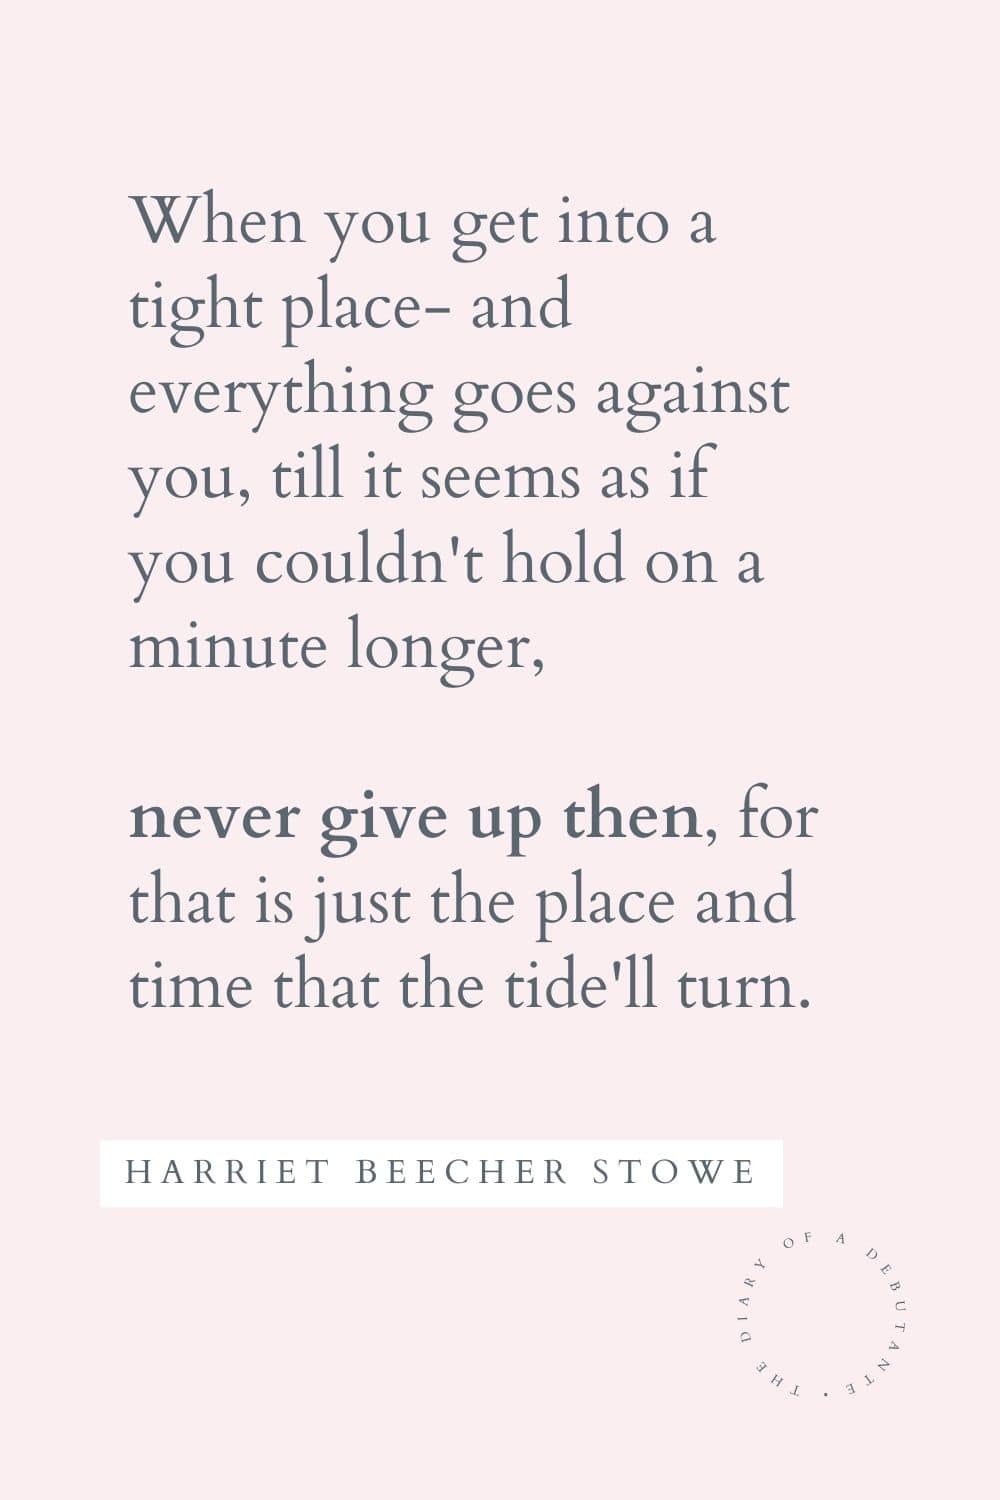 Inspirational Harriet Beecher Stowe quote about never giving up curated by blogger Stephanie Ziajka for Women's History Month on Diary of a Debutante